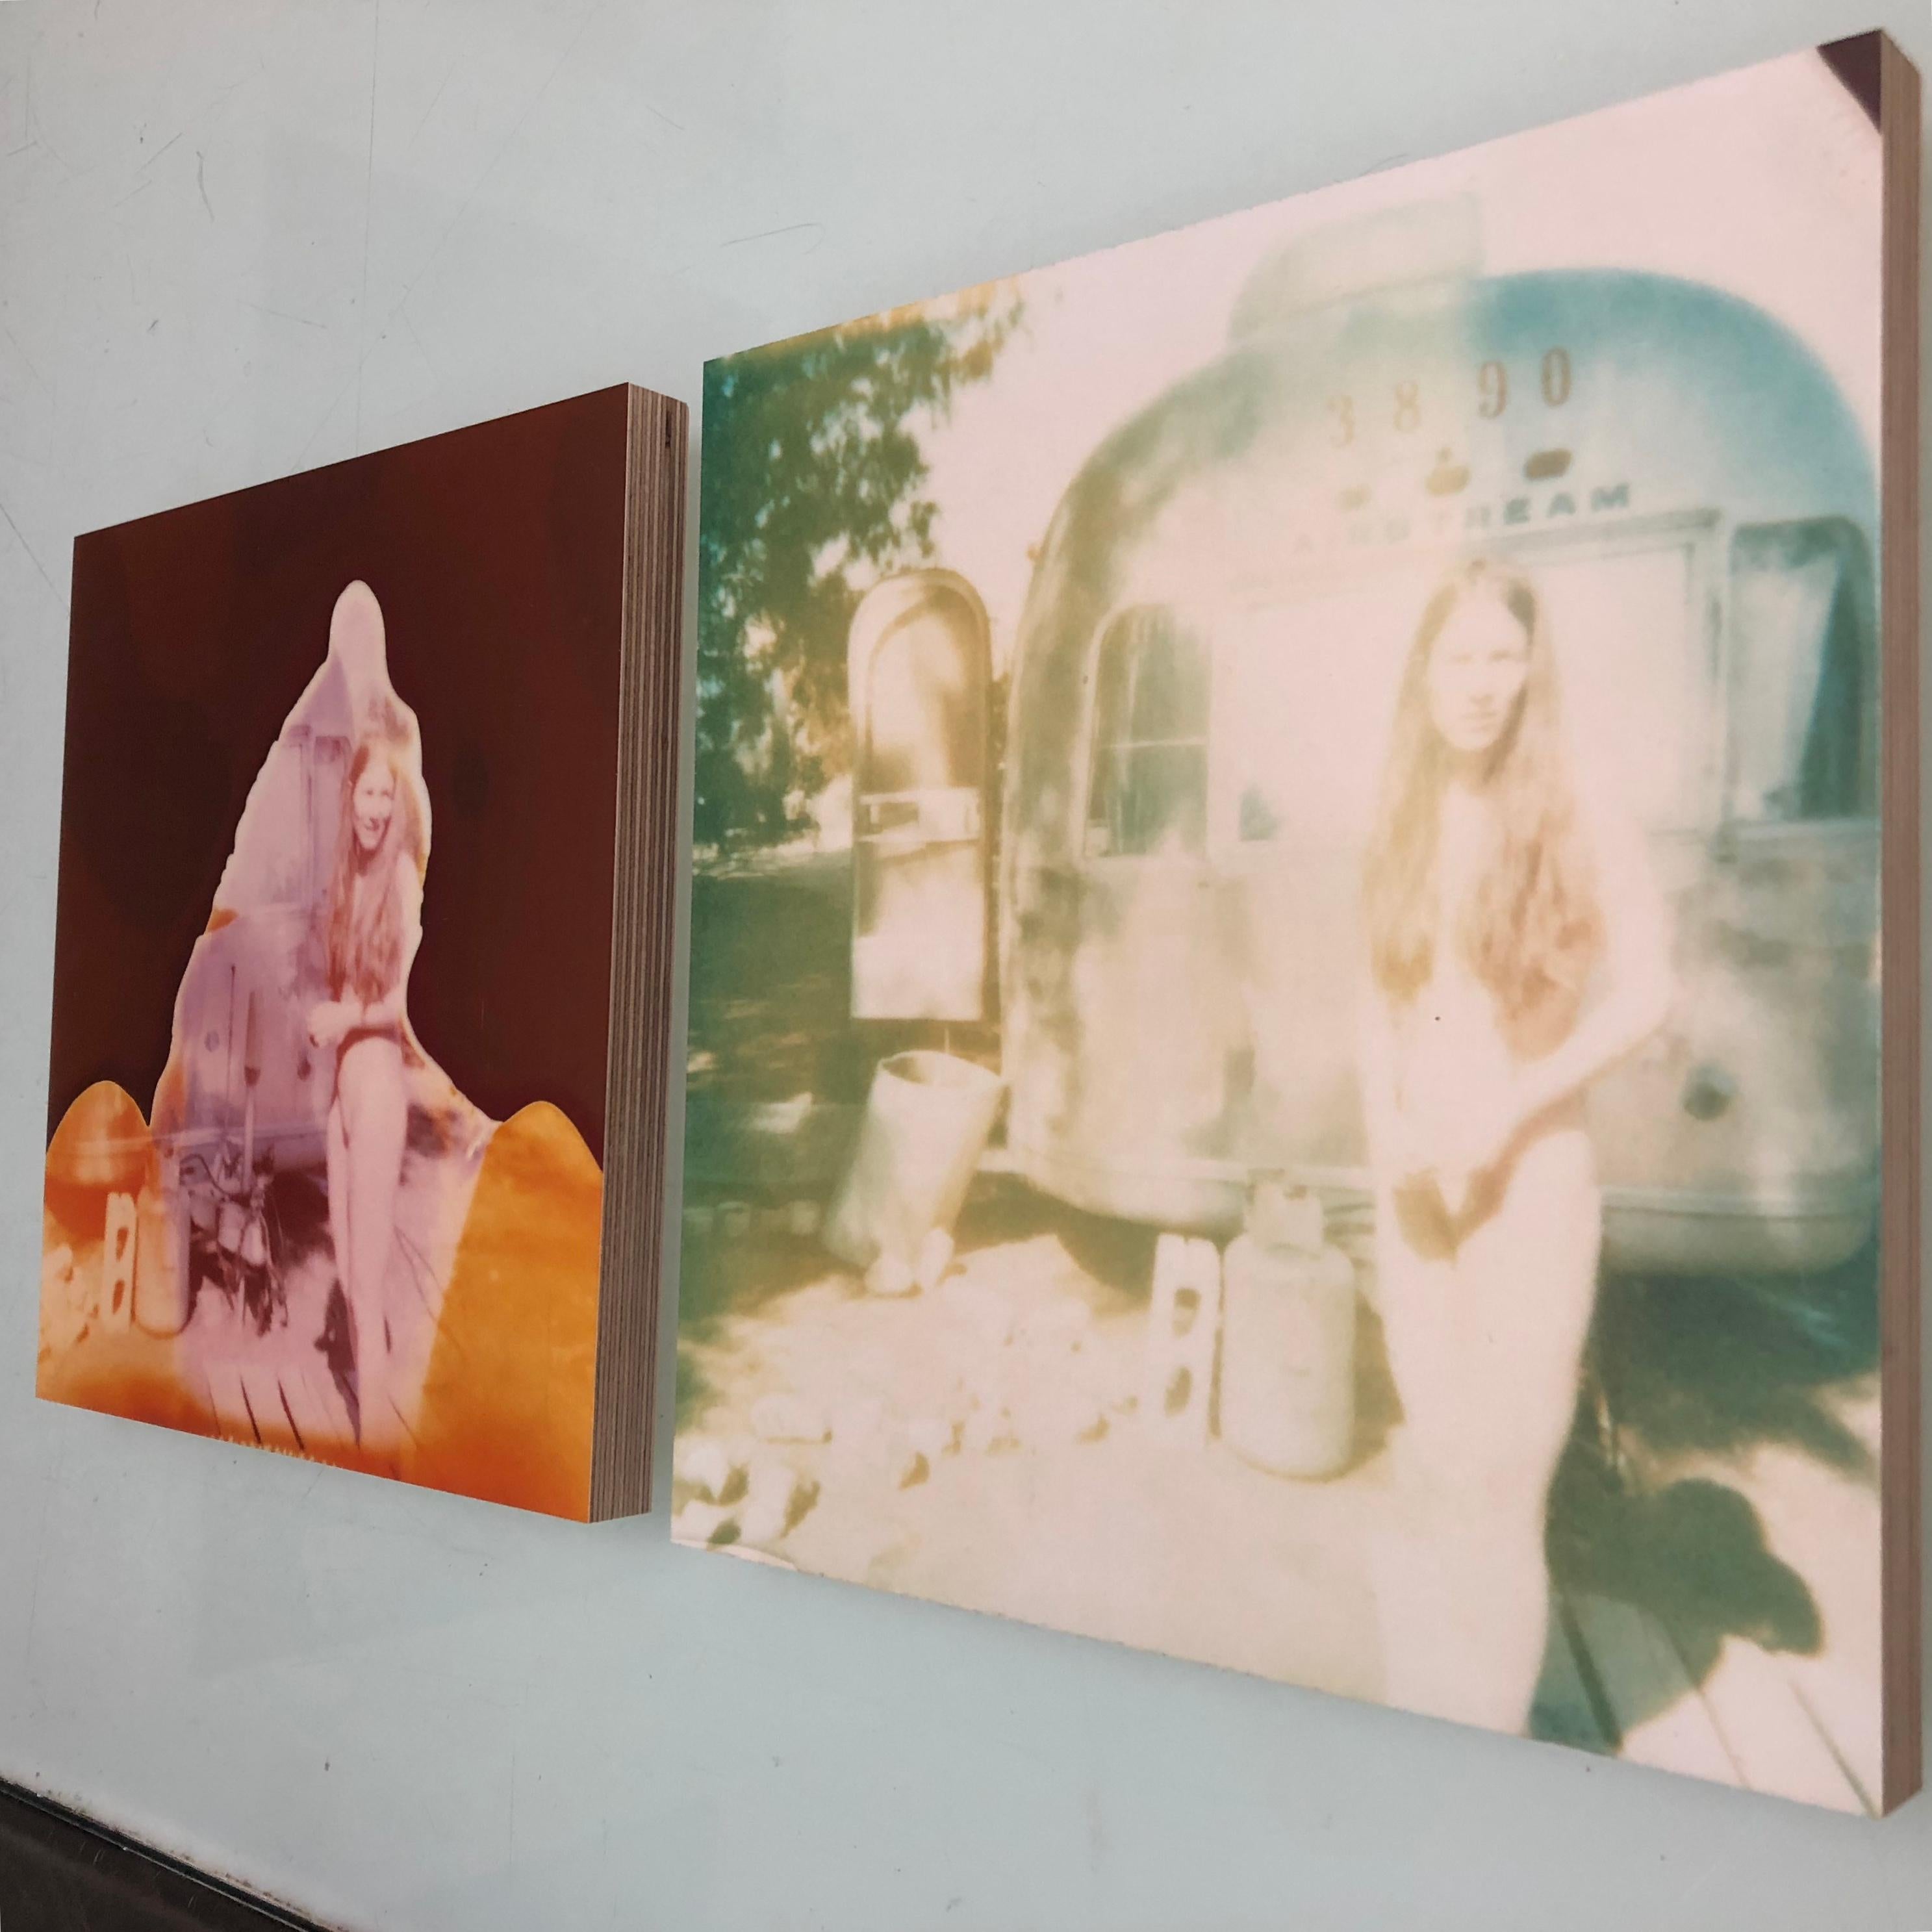 In front of Trailer (Sidewinder), diptych - Polaroid, Nude, Contemporary, Analog 4